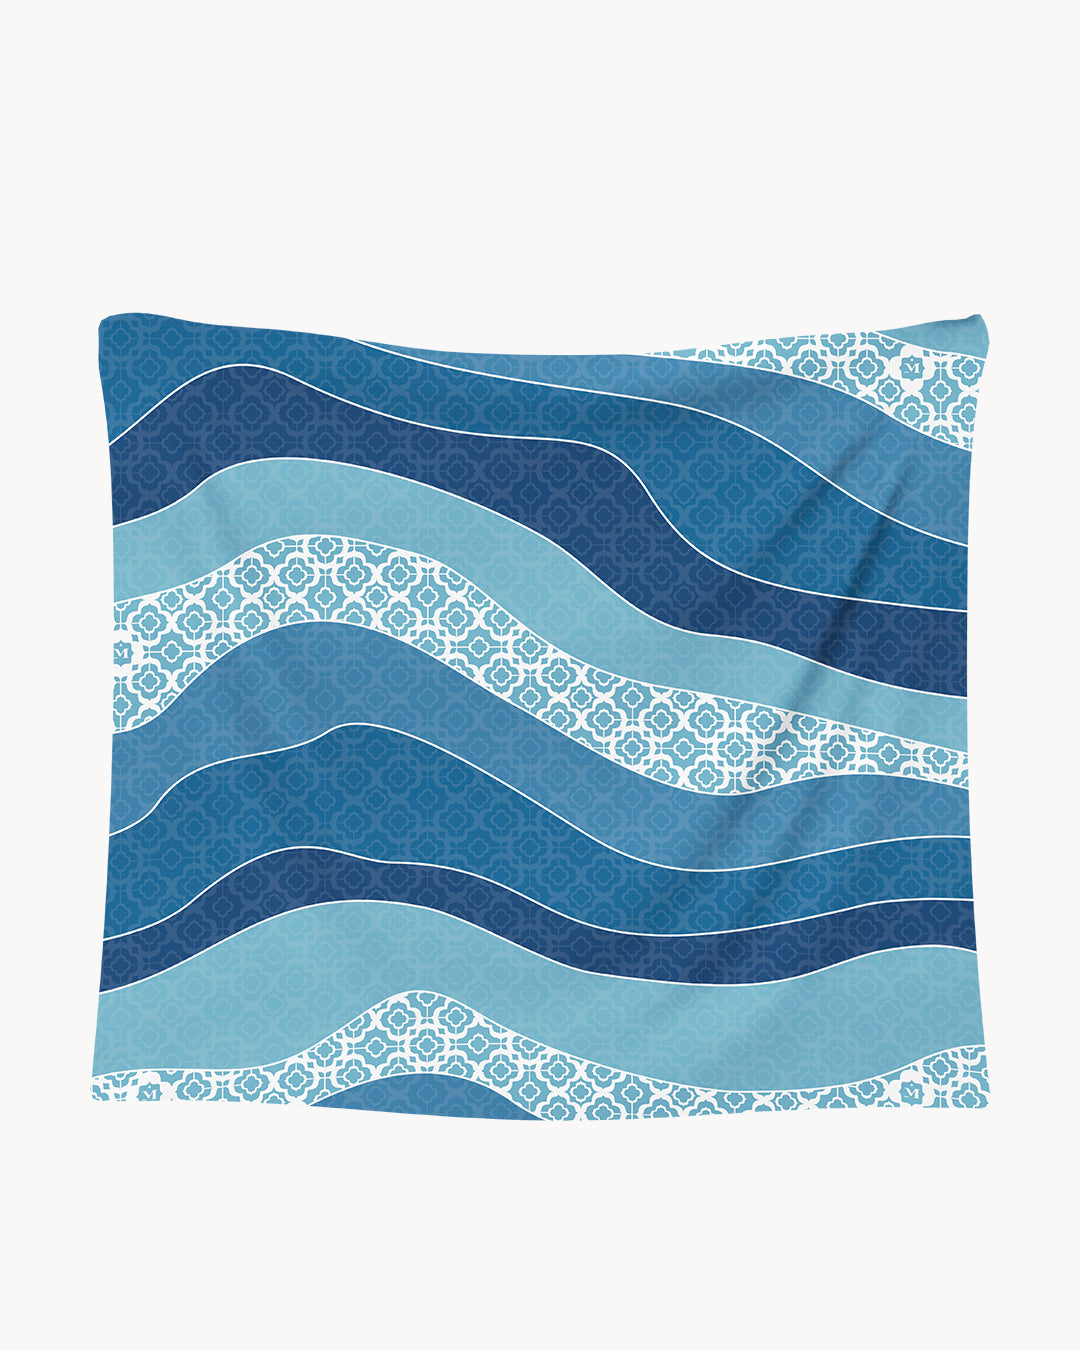 Grotto Waves Scarf